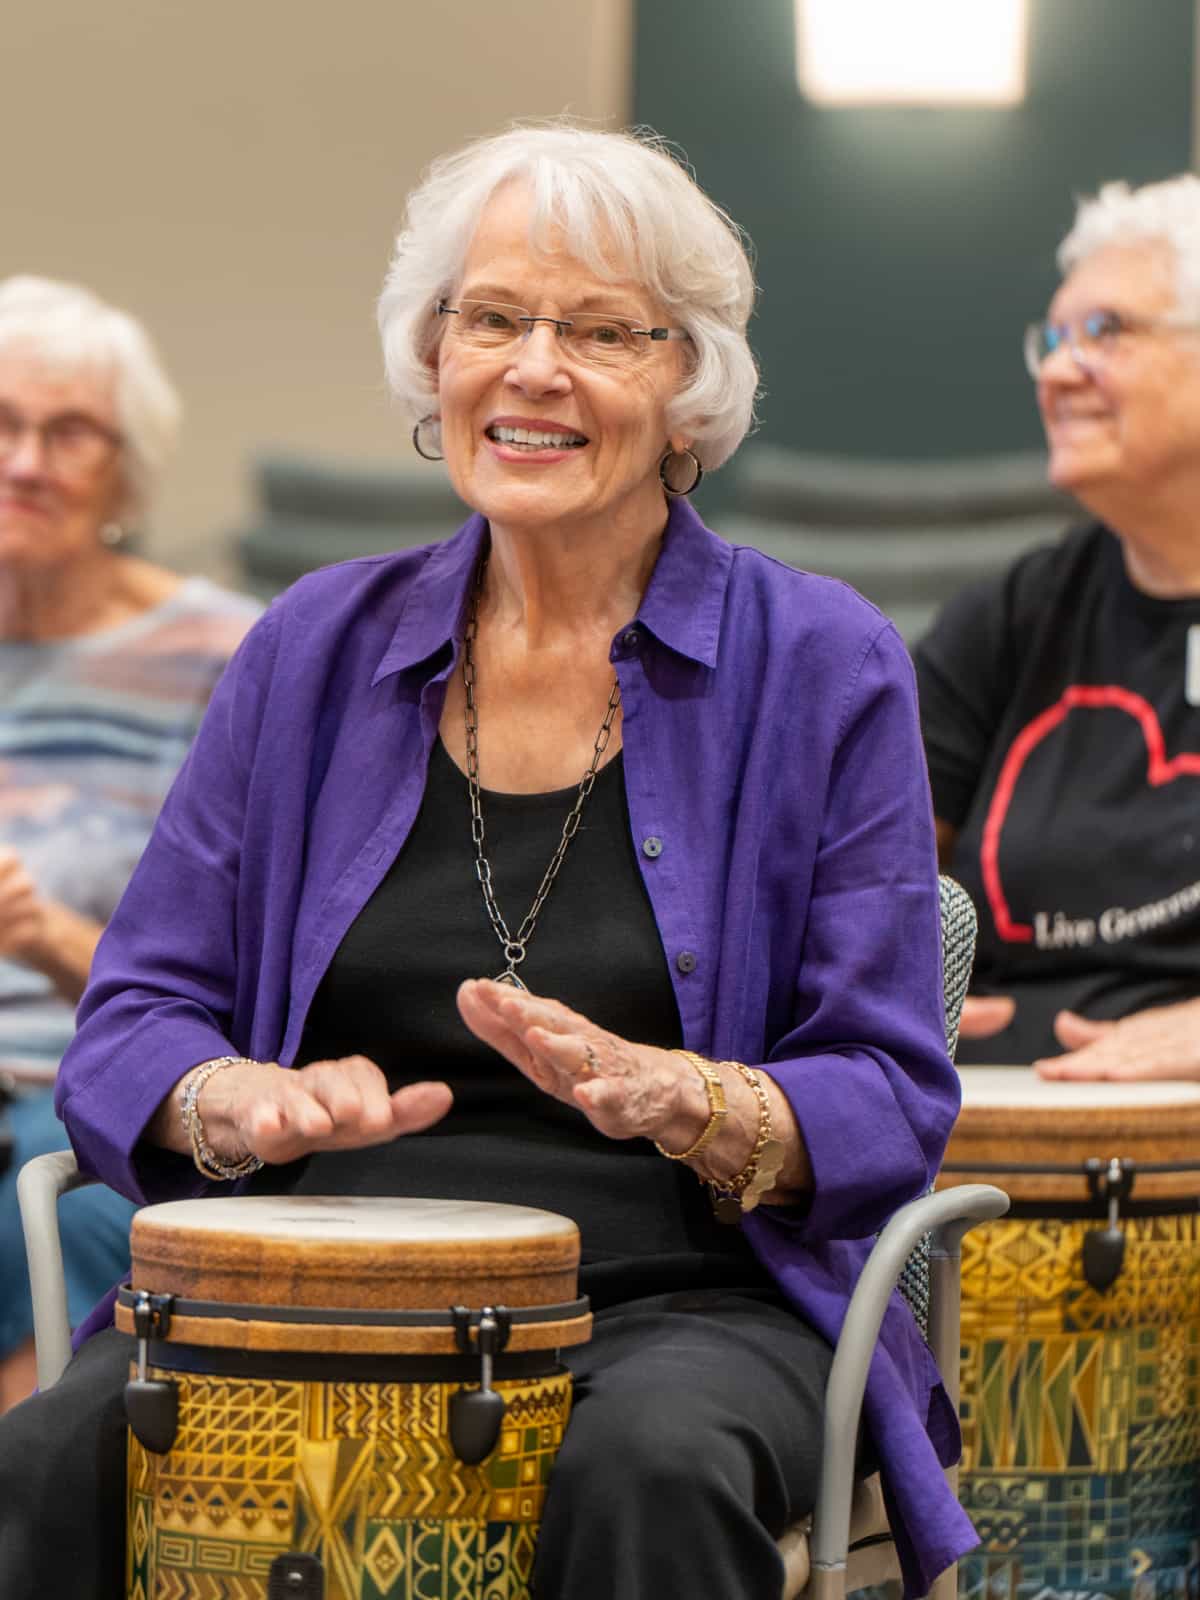 Senior woman smiles while playing a hand drum.